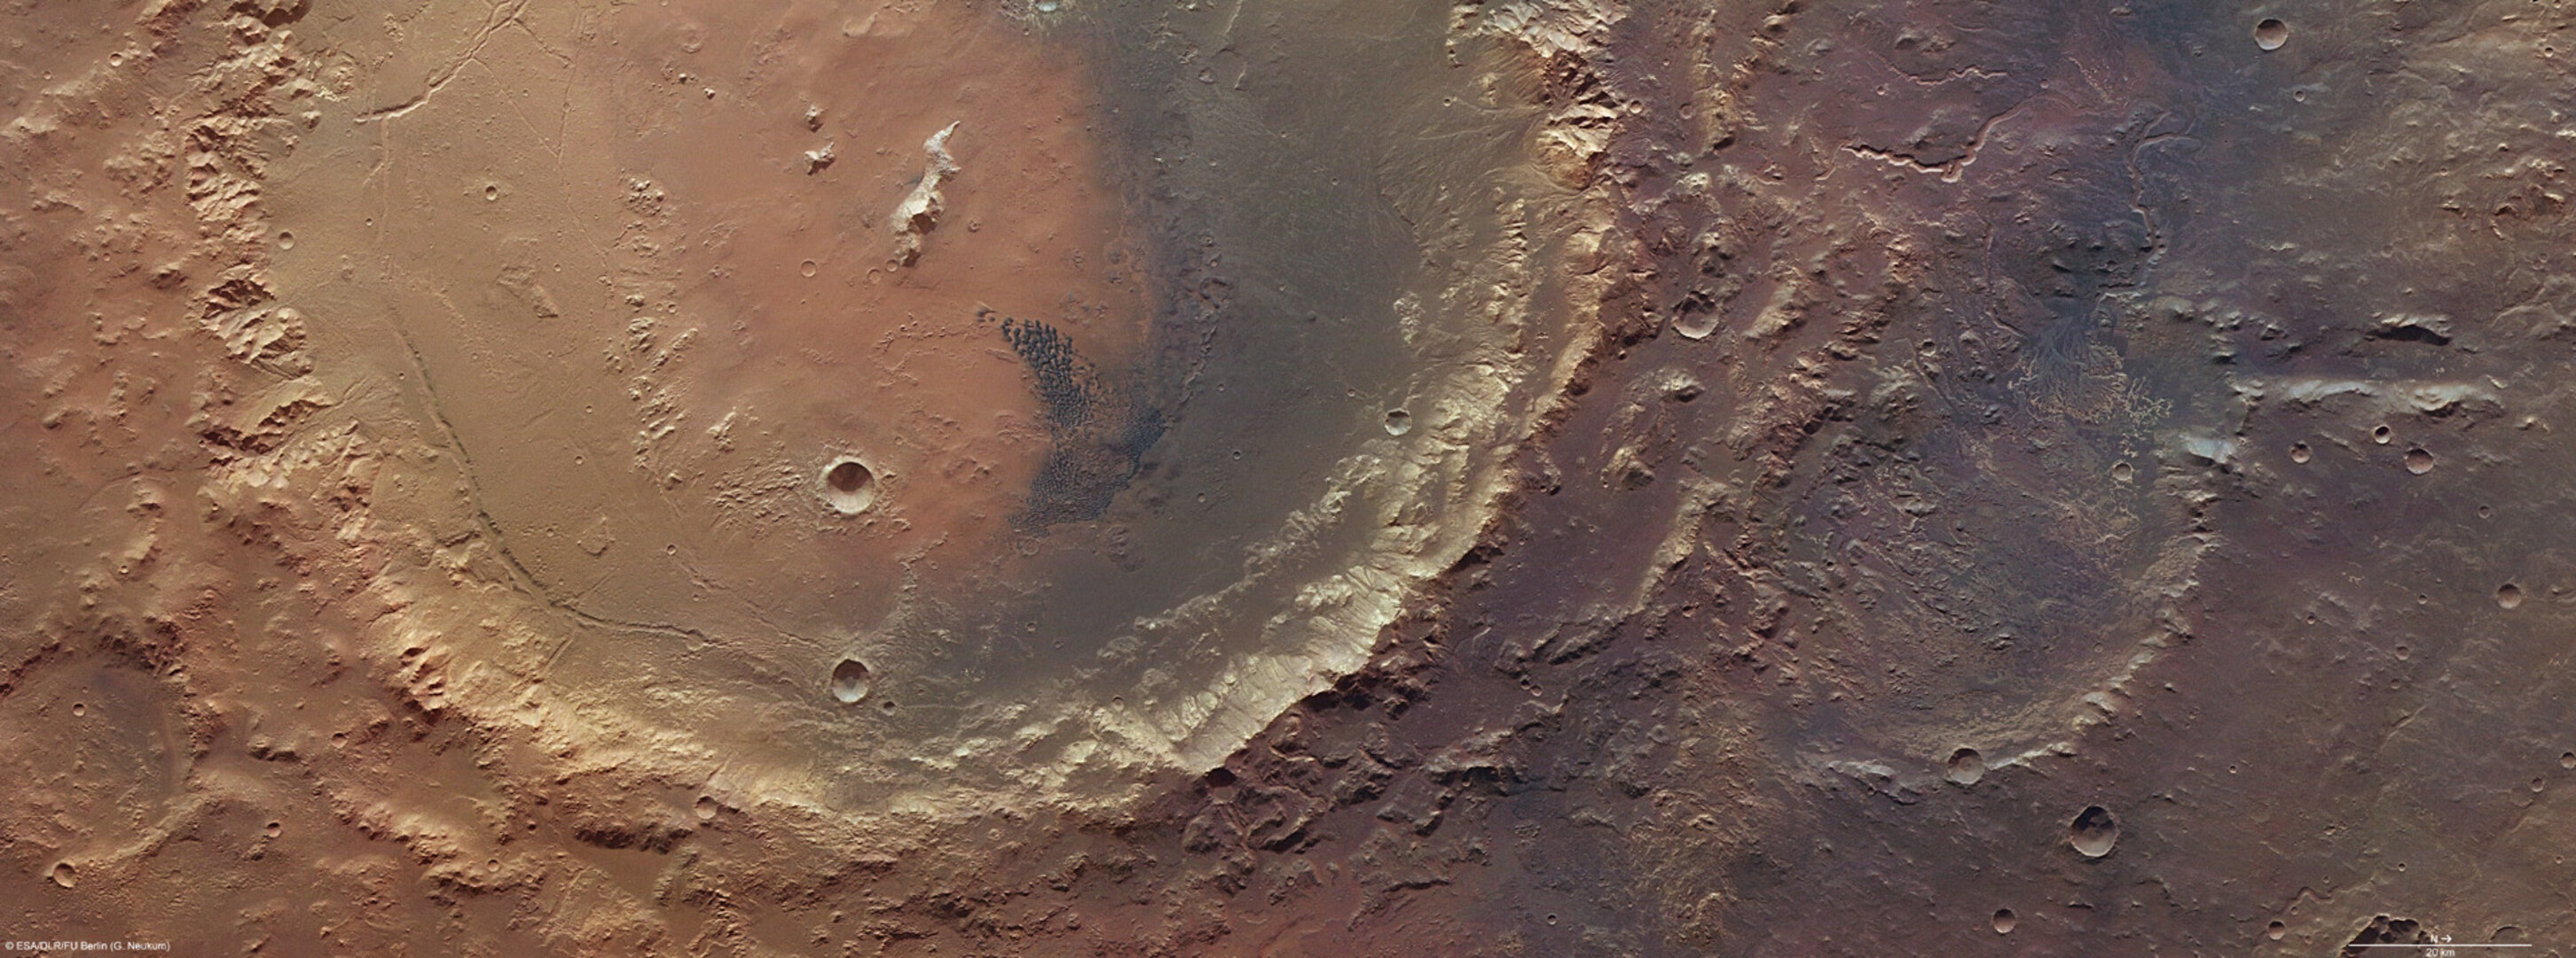 The Holden and Eberswalde craters observed by Mars Express